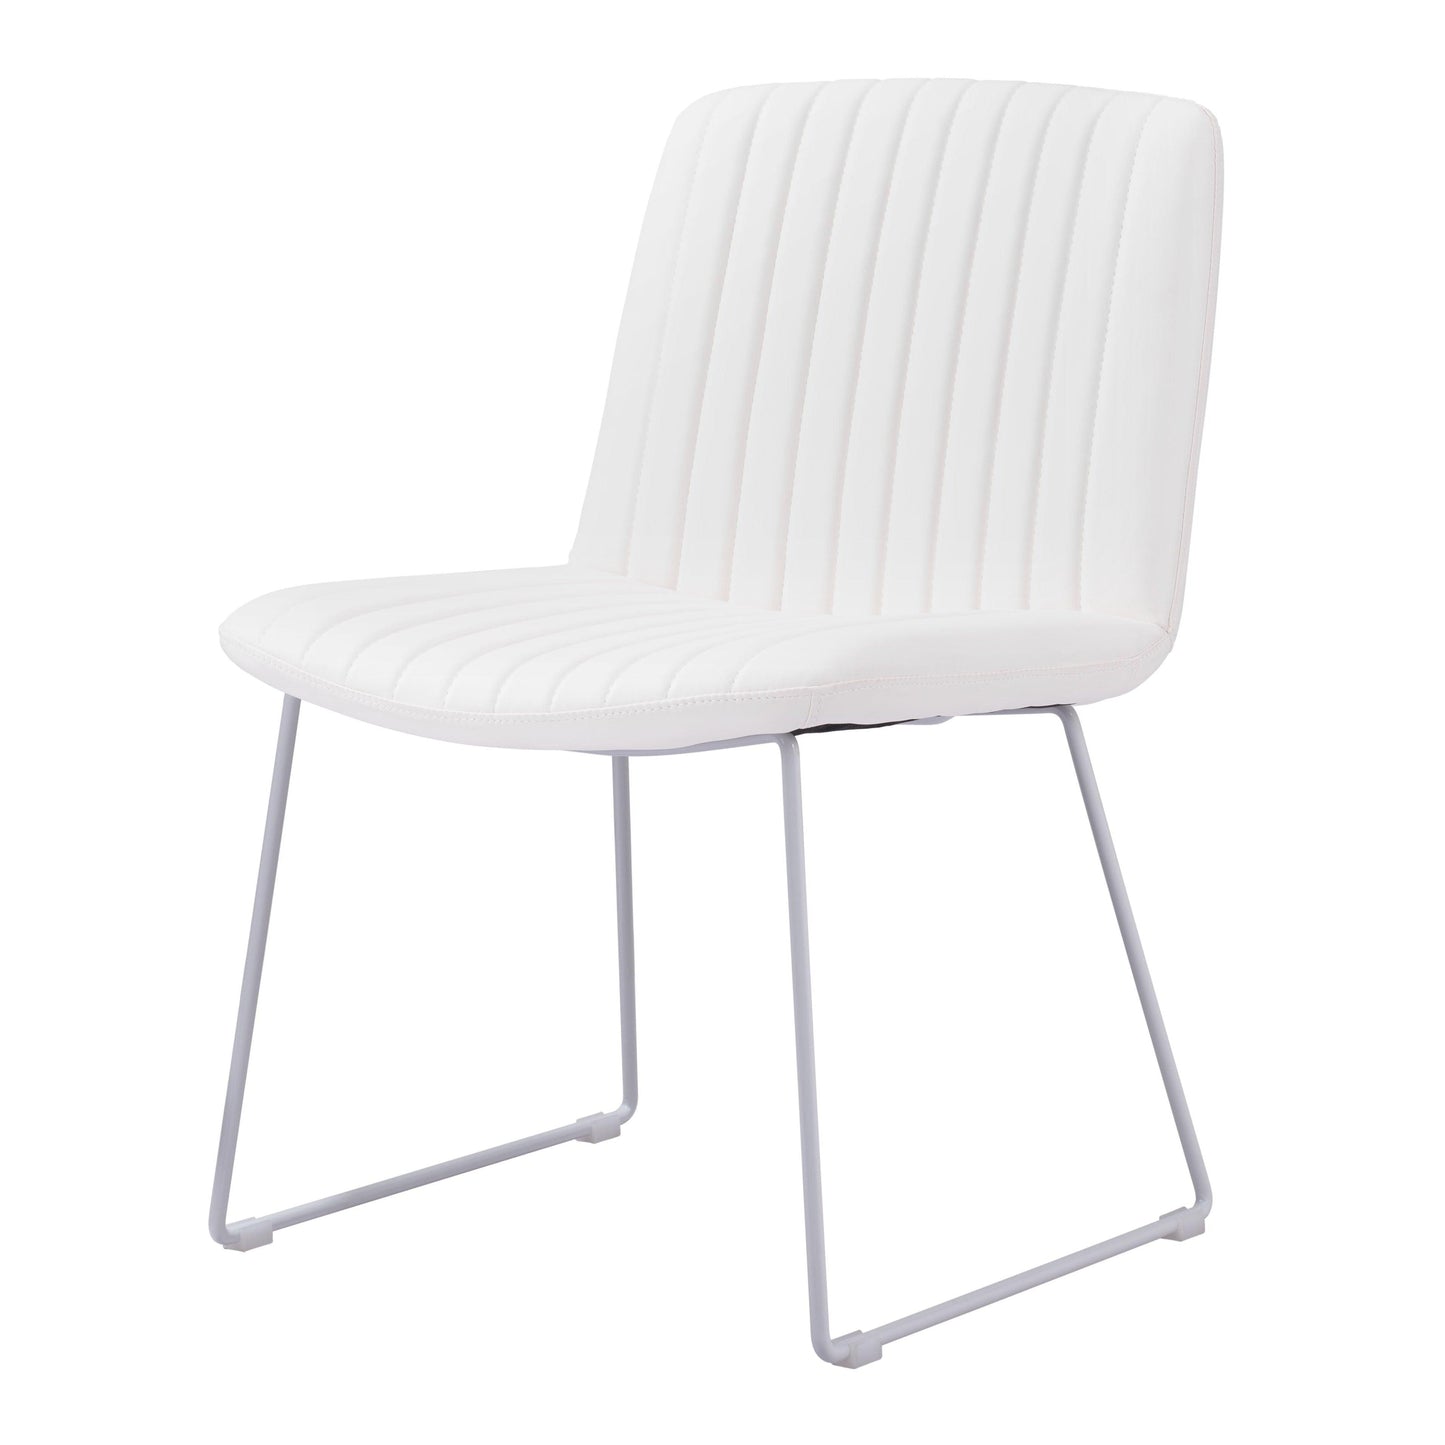 Joy Dining Chair (Set of 2) White - Sideboards and Things Back Type_Full Back, Back Type_With Back, Brand_Zuo Modern, Color_White, Depth_20-30, Finish_Powder Coated, Height_30-40, Materials_Metal, Materials_Upholstery, Metal Type_Steel, Number of Pieces_2PC Set, Product Type_Dining Height, Seat Material_Upholstery, Shape_Armless, Upholstery Type_Leather, Upholstery Type_Vegan Leather, Width_20-30